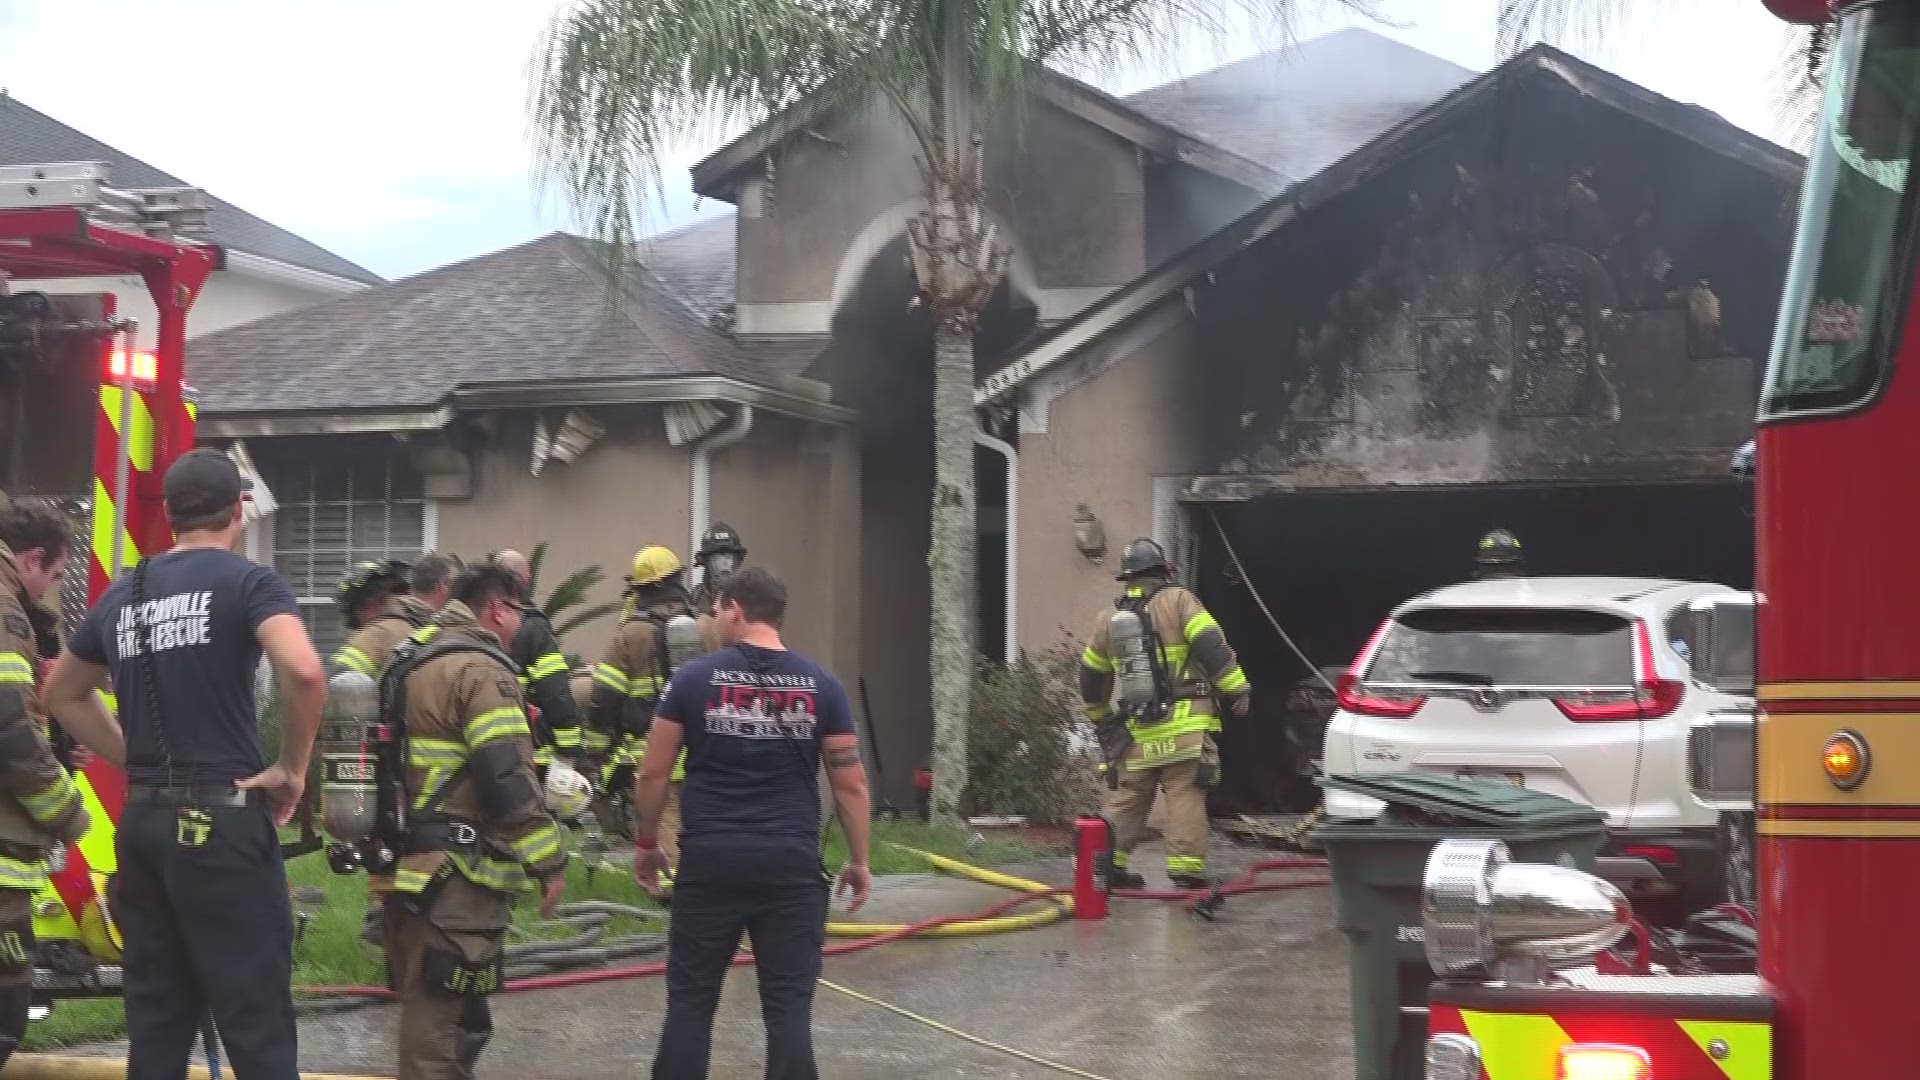 The fire happened in the 10600 block of Brighton Hills Circle North, according to the Jacksonville Fire and Rescue Department.